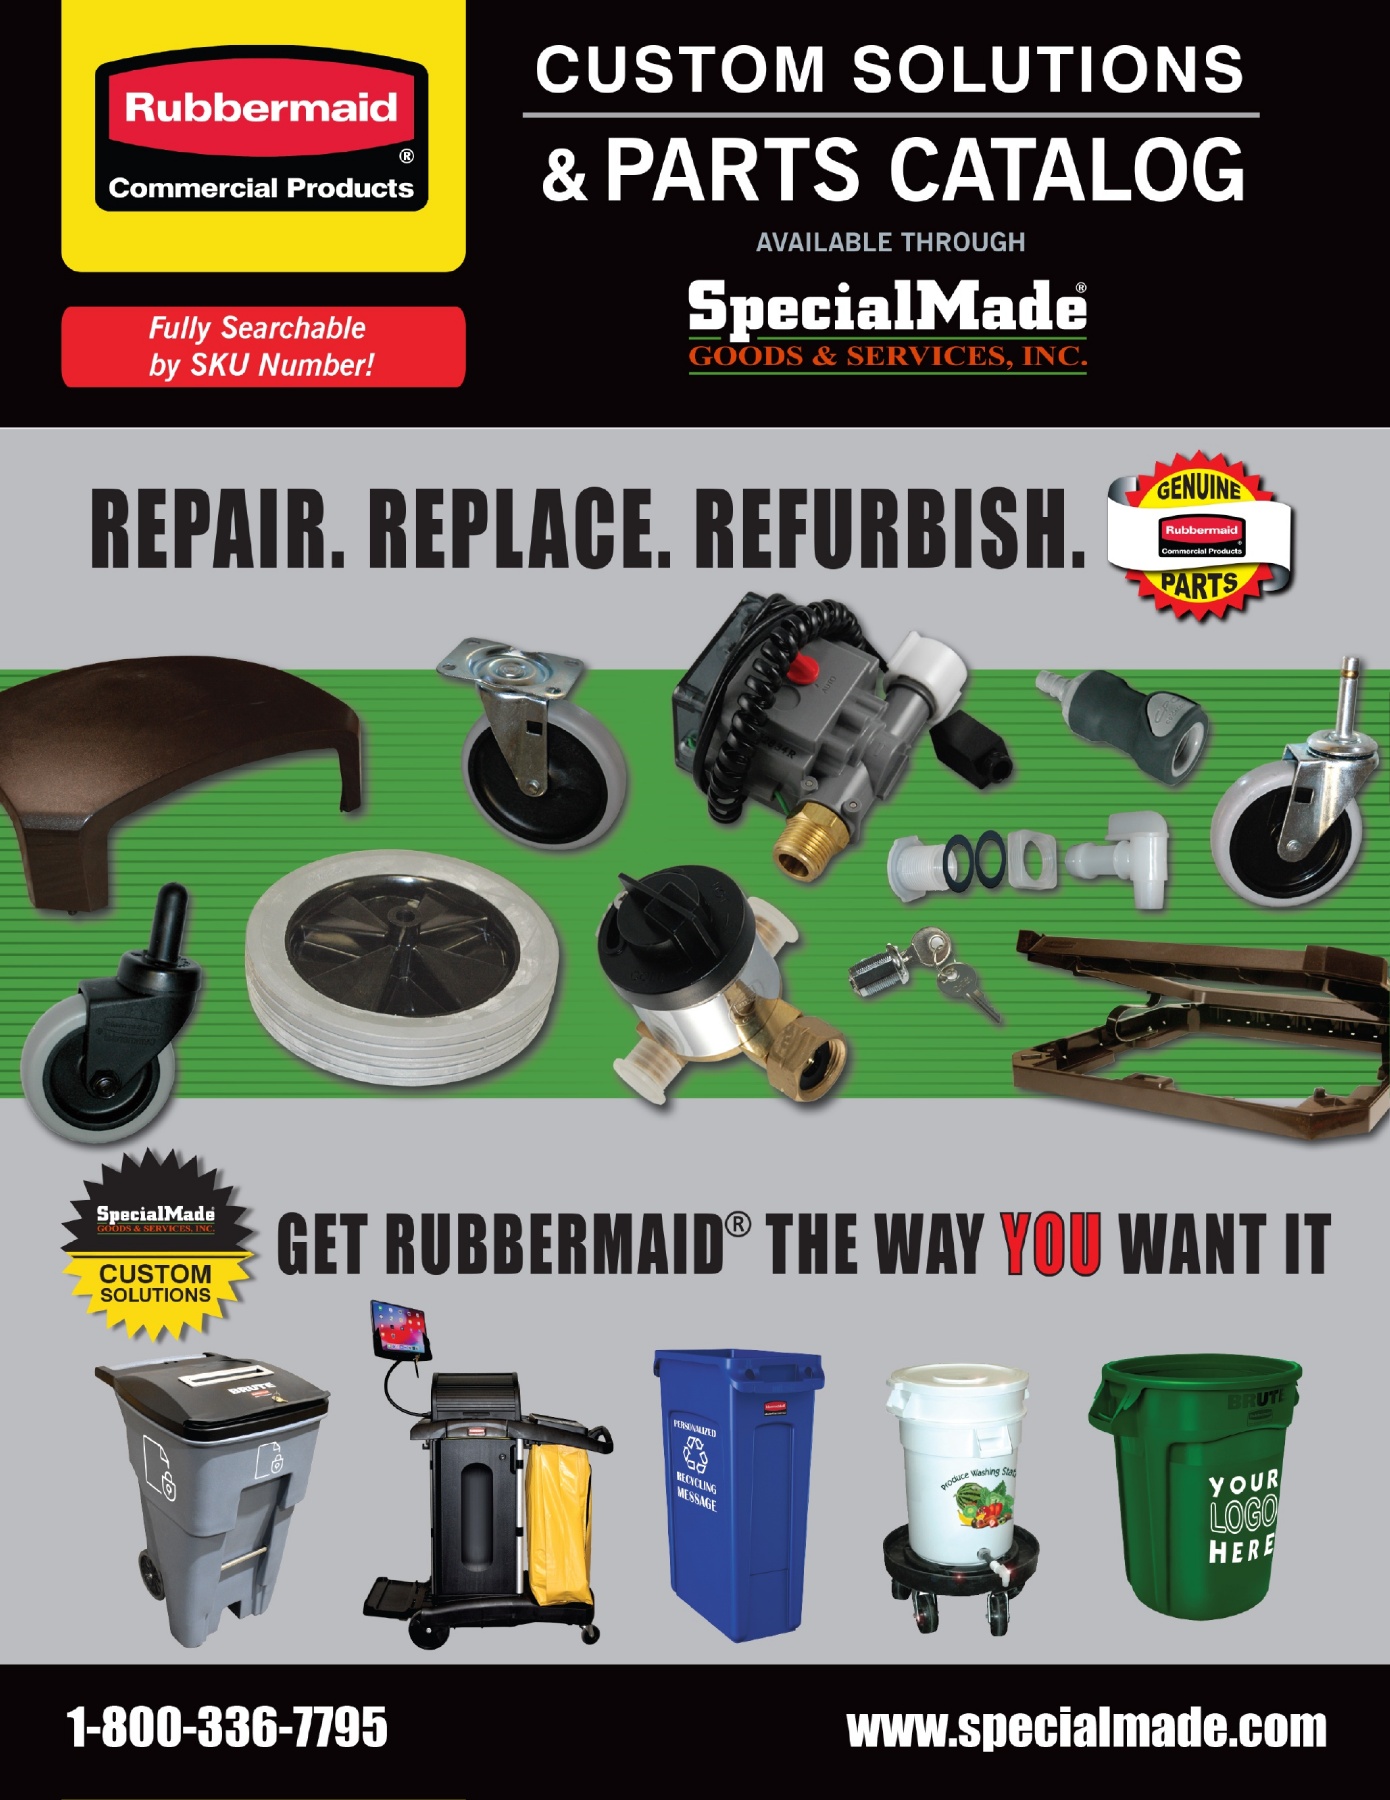 All Rubbermaid Commercial Products catalogs and technical brochures